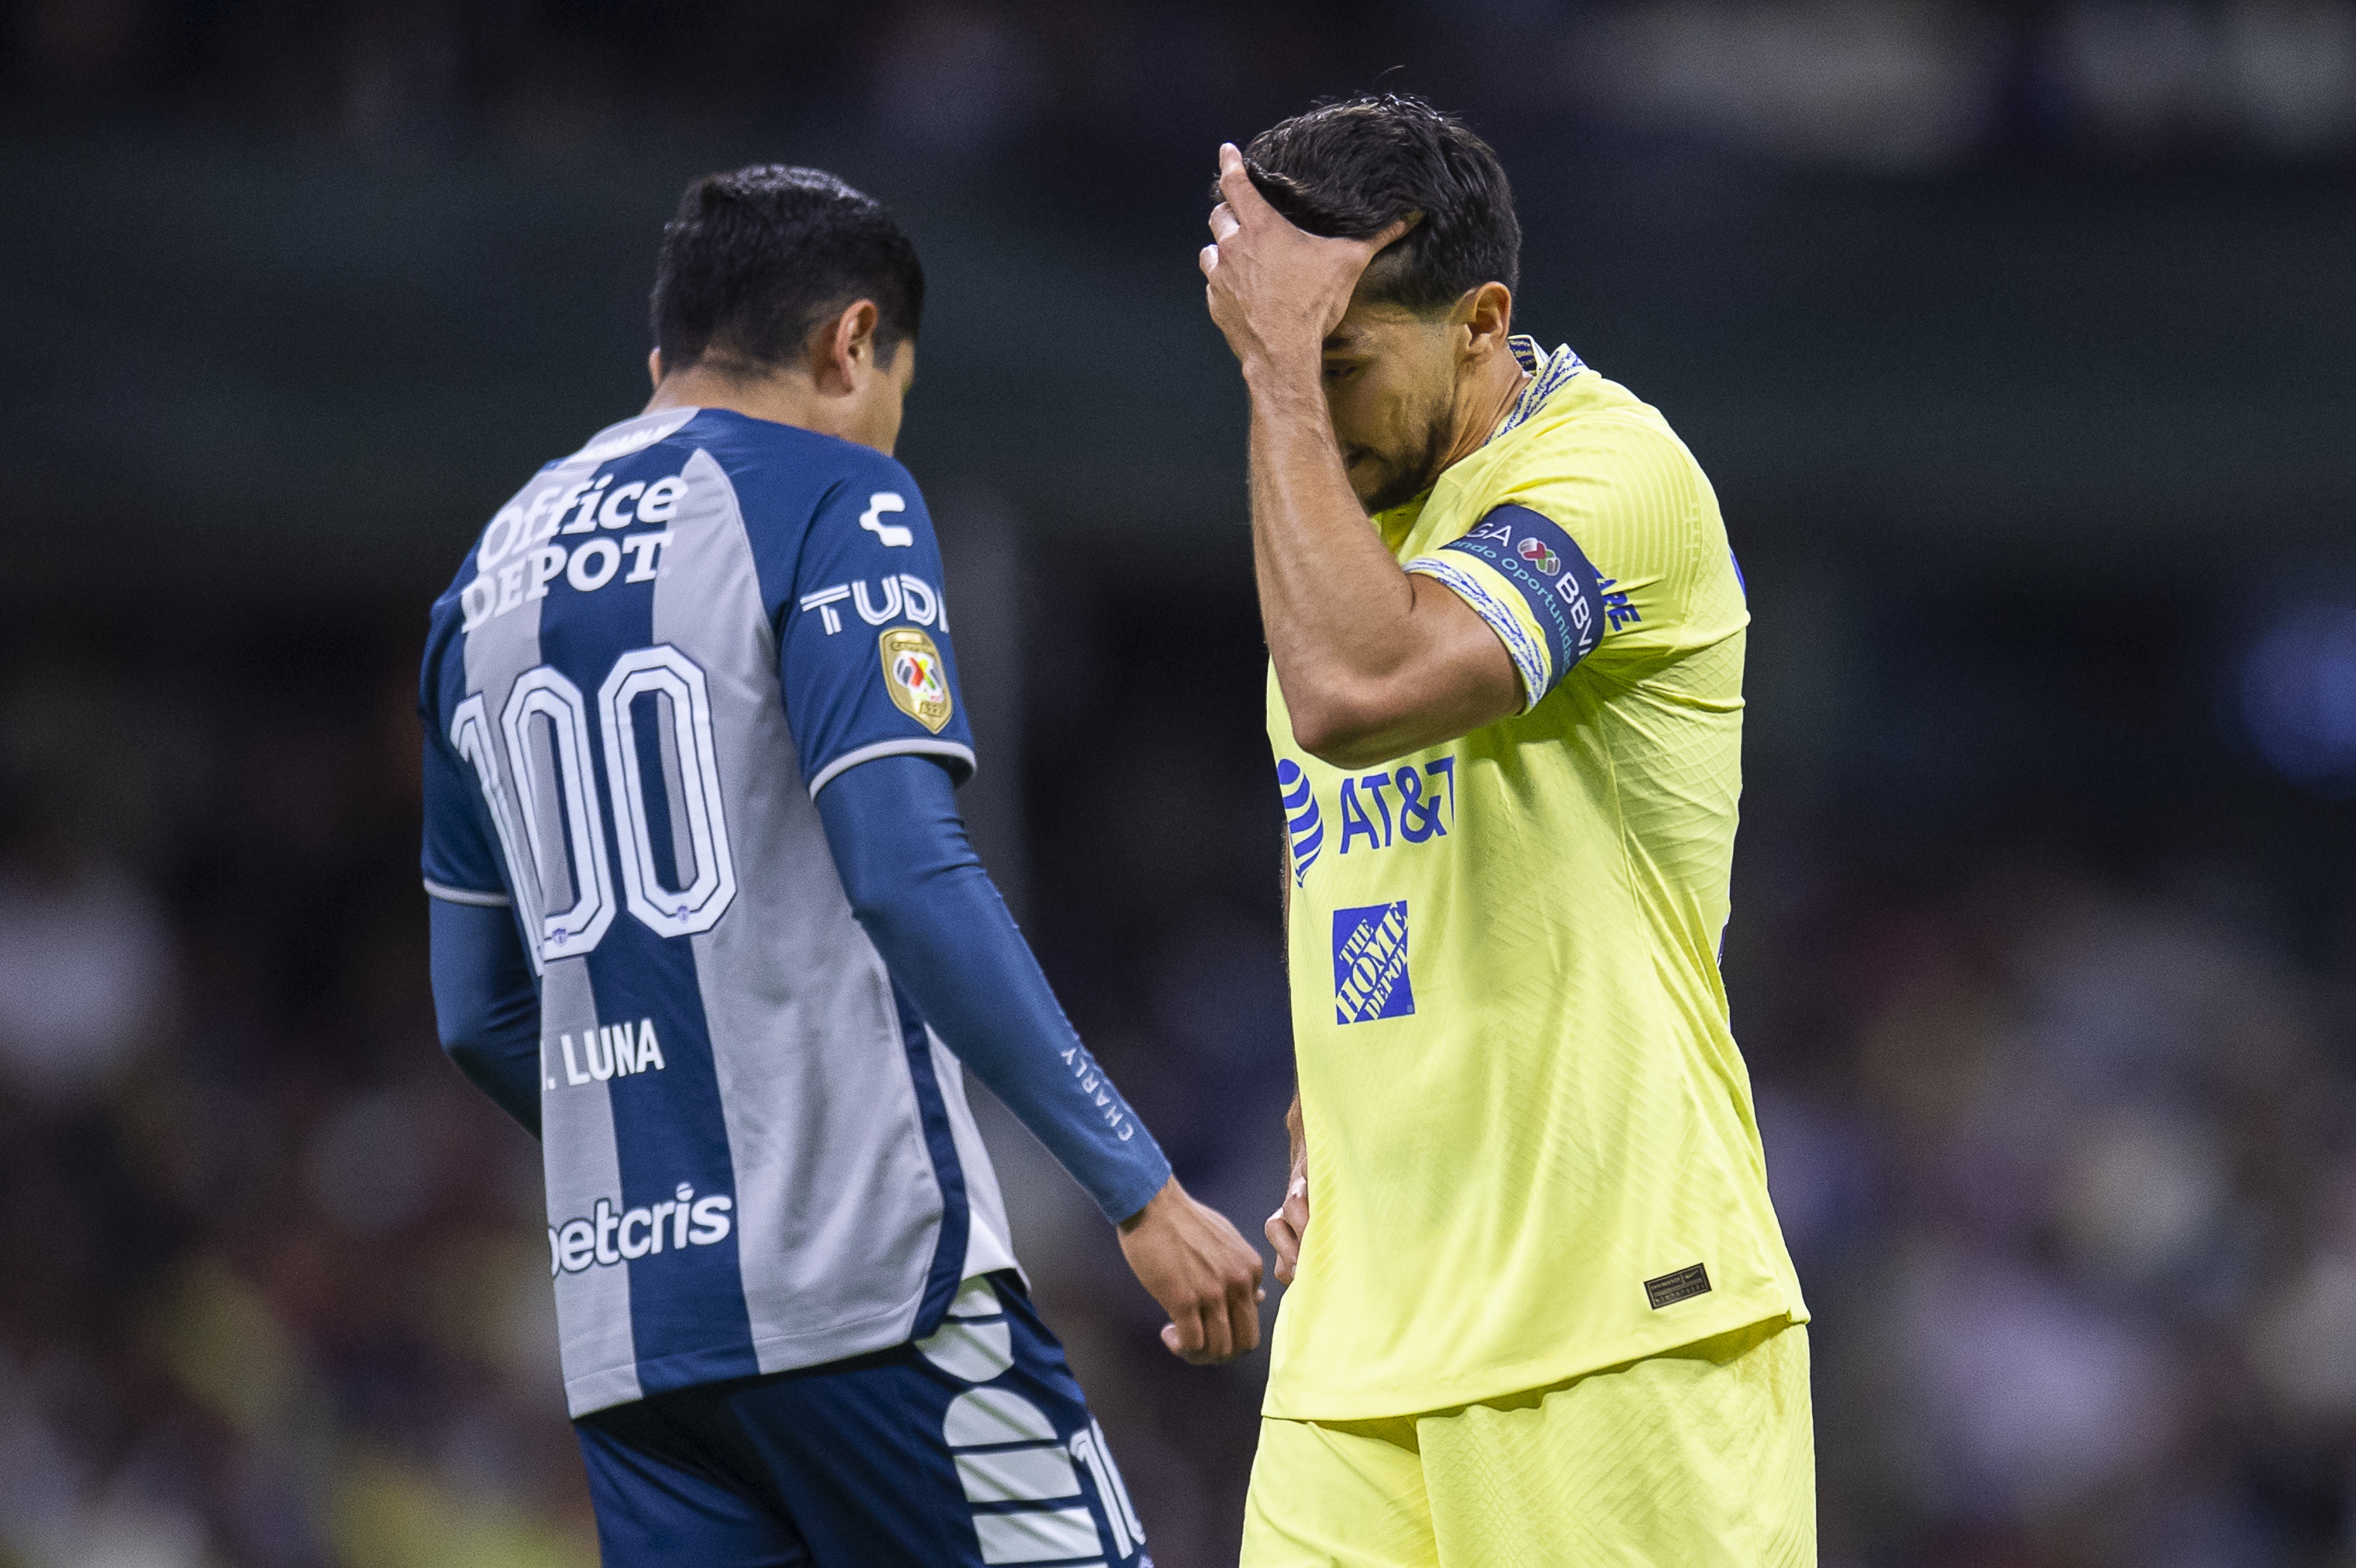 Home defeat to Pachuca sees America fall short of record - AS USA